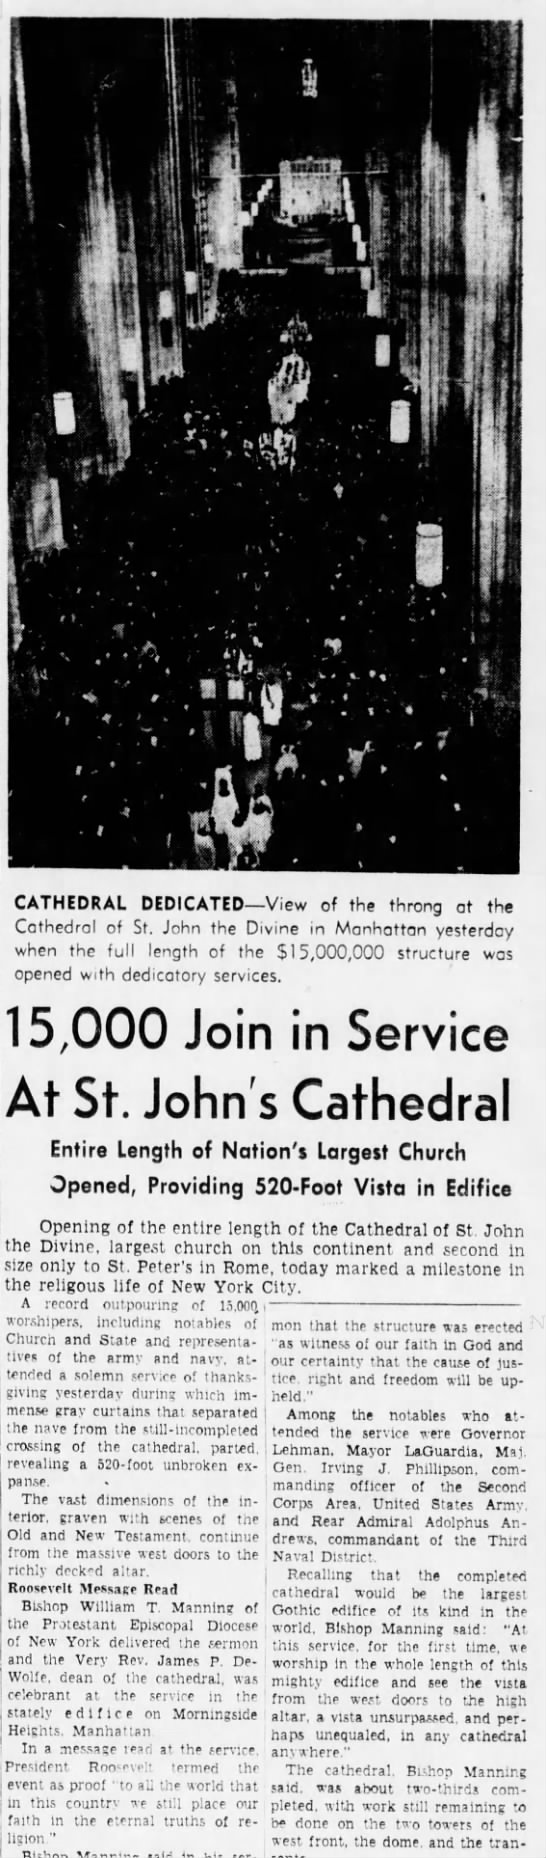 15,000 Join in Service At St. John's Cathedral - 